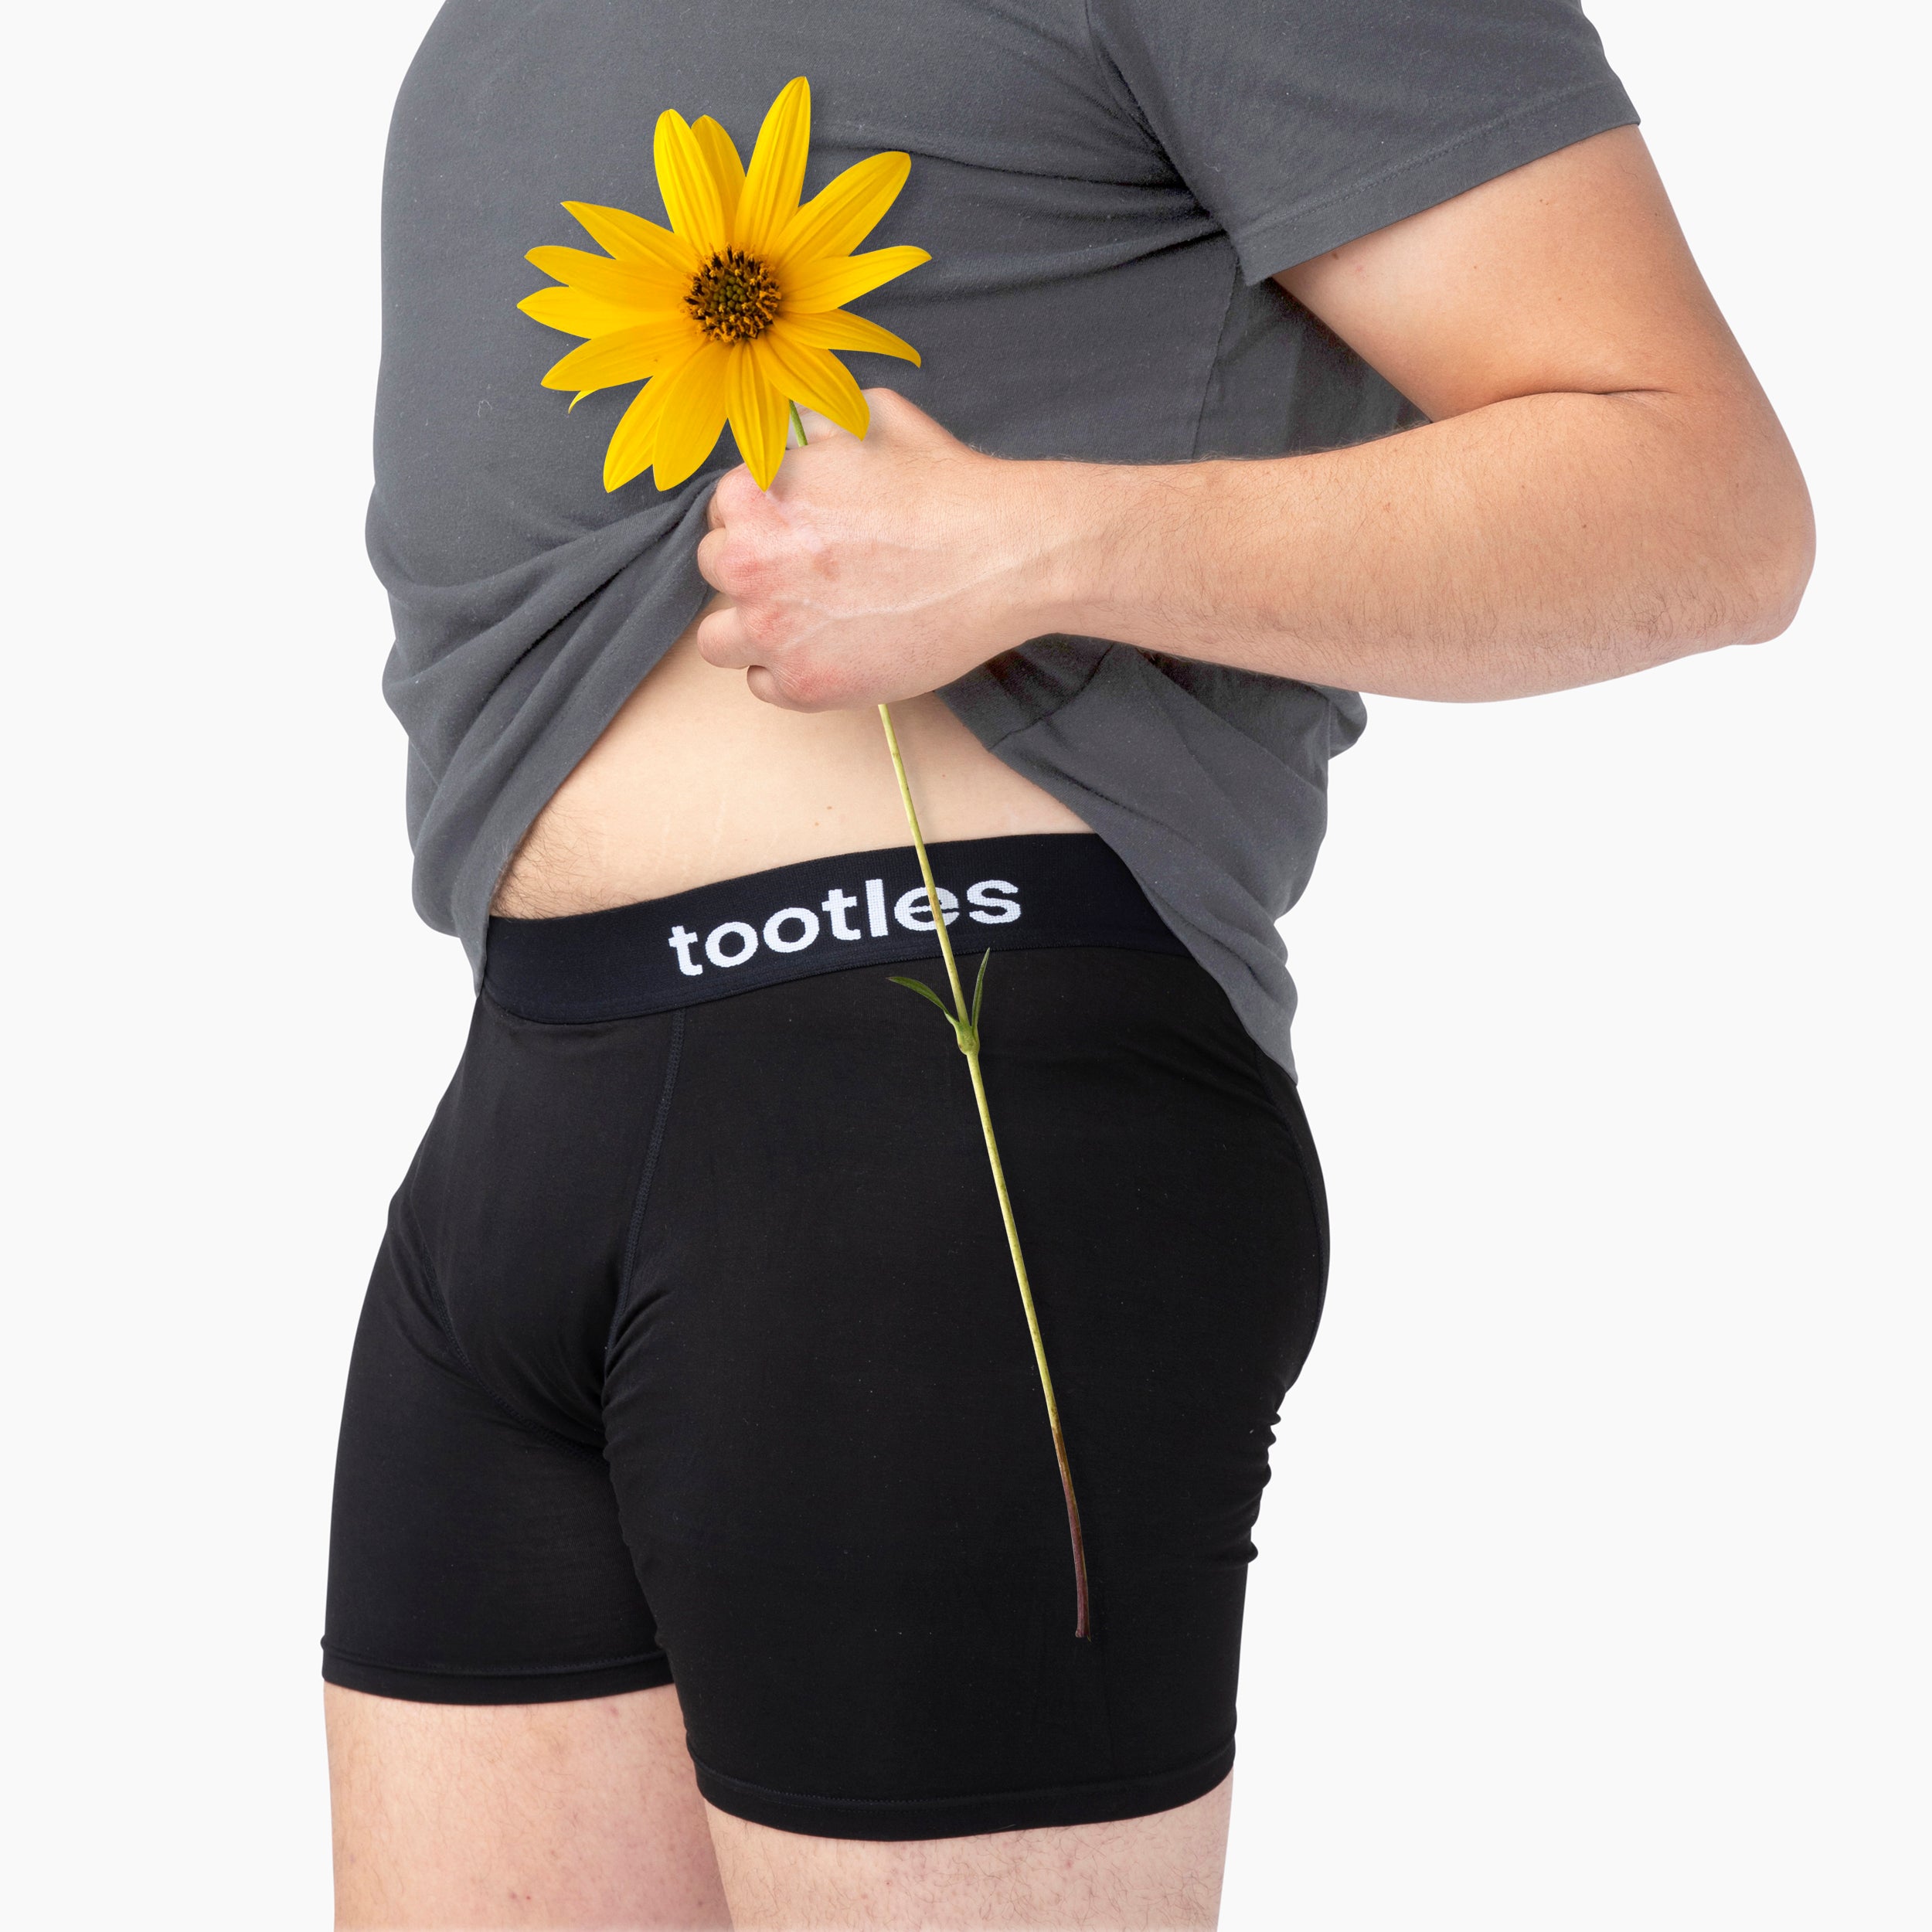 Stitches Medical Fart Filtering Underwear by TOOTLES - Mens Briefs with  100% Activated Charcoal Underwear Liners - Neutralizes & Eliminates  Flatulence